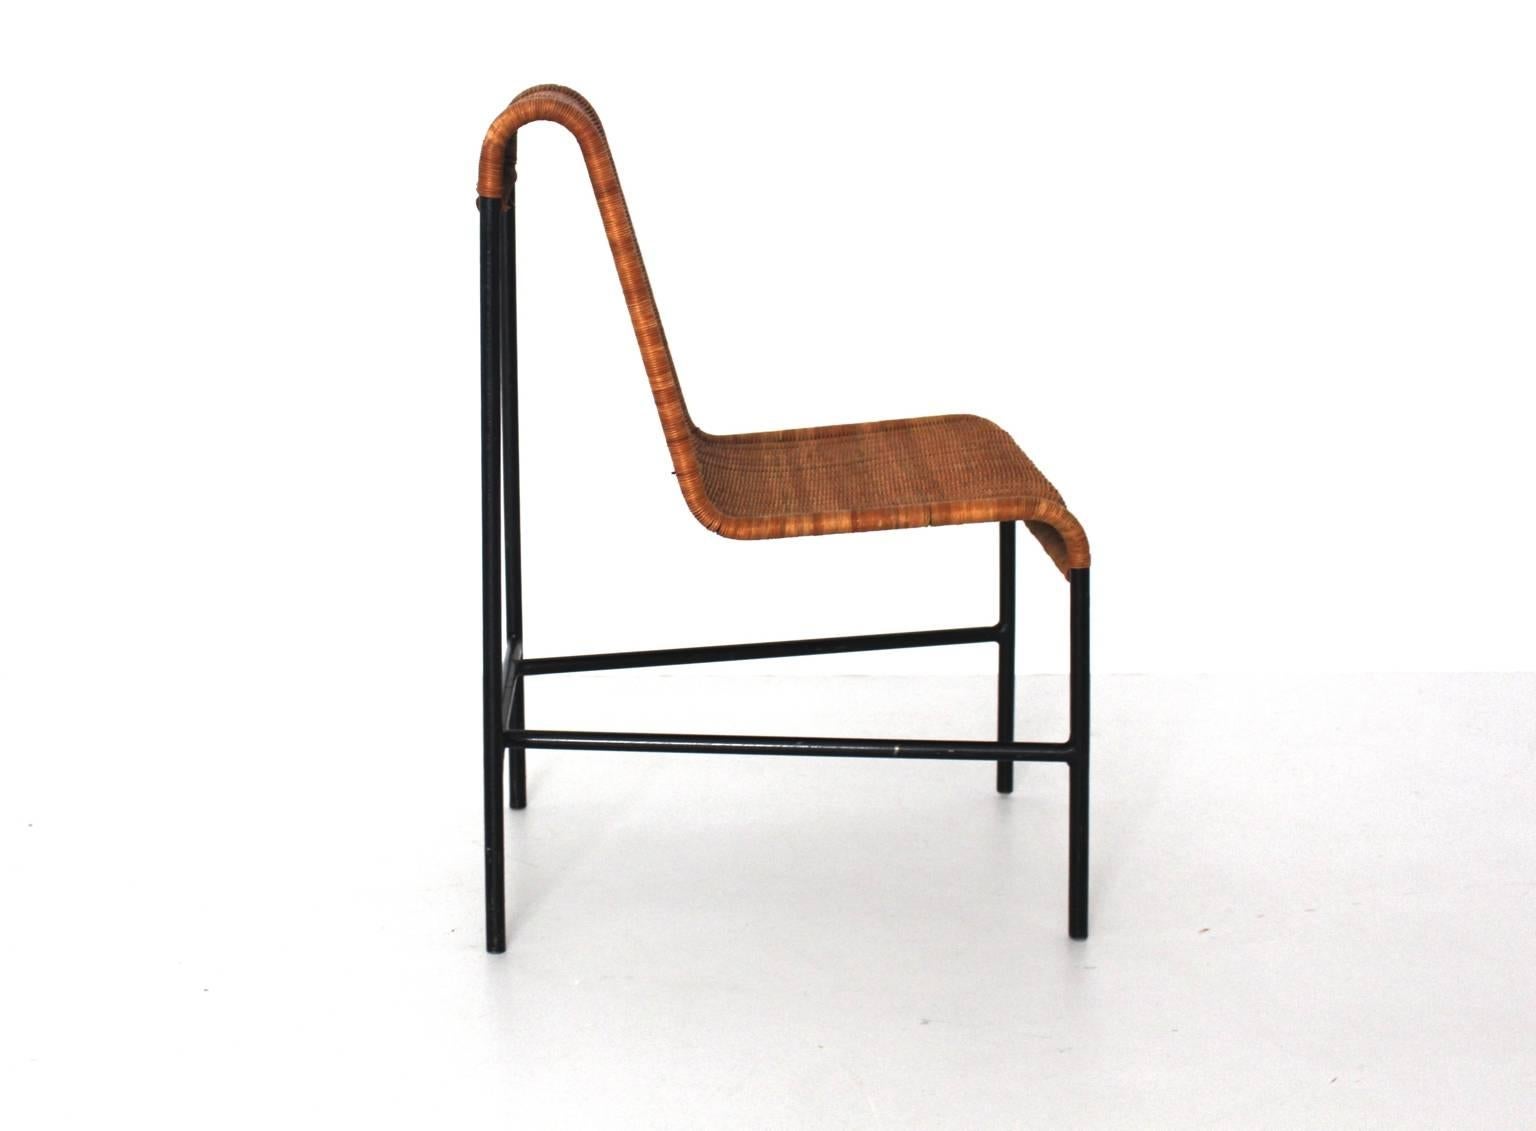 Mid Century Modern black lacquered tubular steel frame while the seat and back shows wickerwork.
Designed by Harold Cohen and Davis Pratt, USA, 1953.
Produced: USA, 1953.
lit: Scandinavian design beyond the myth, p. 55
very good condition
approx.